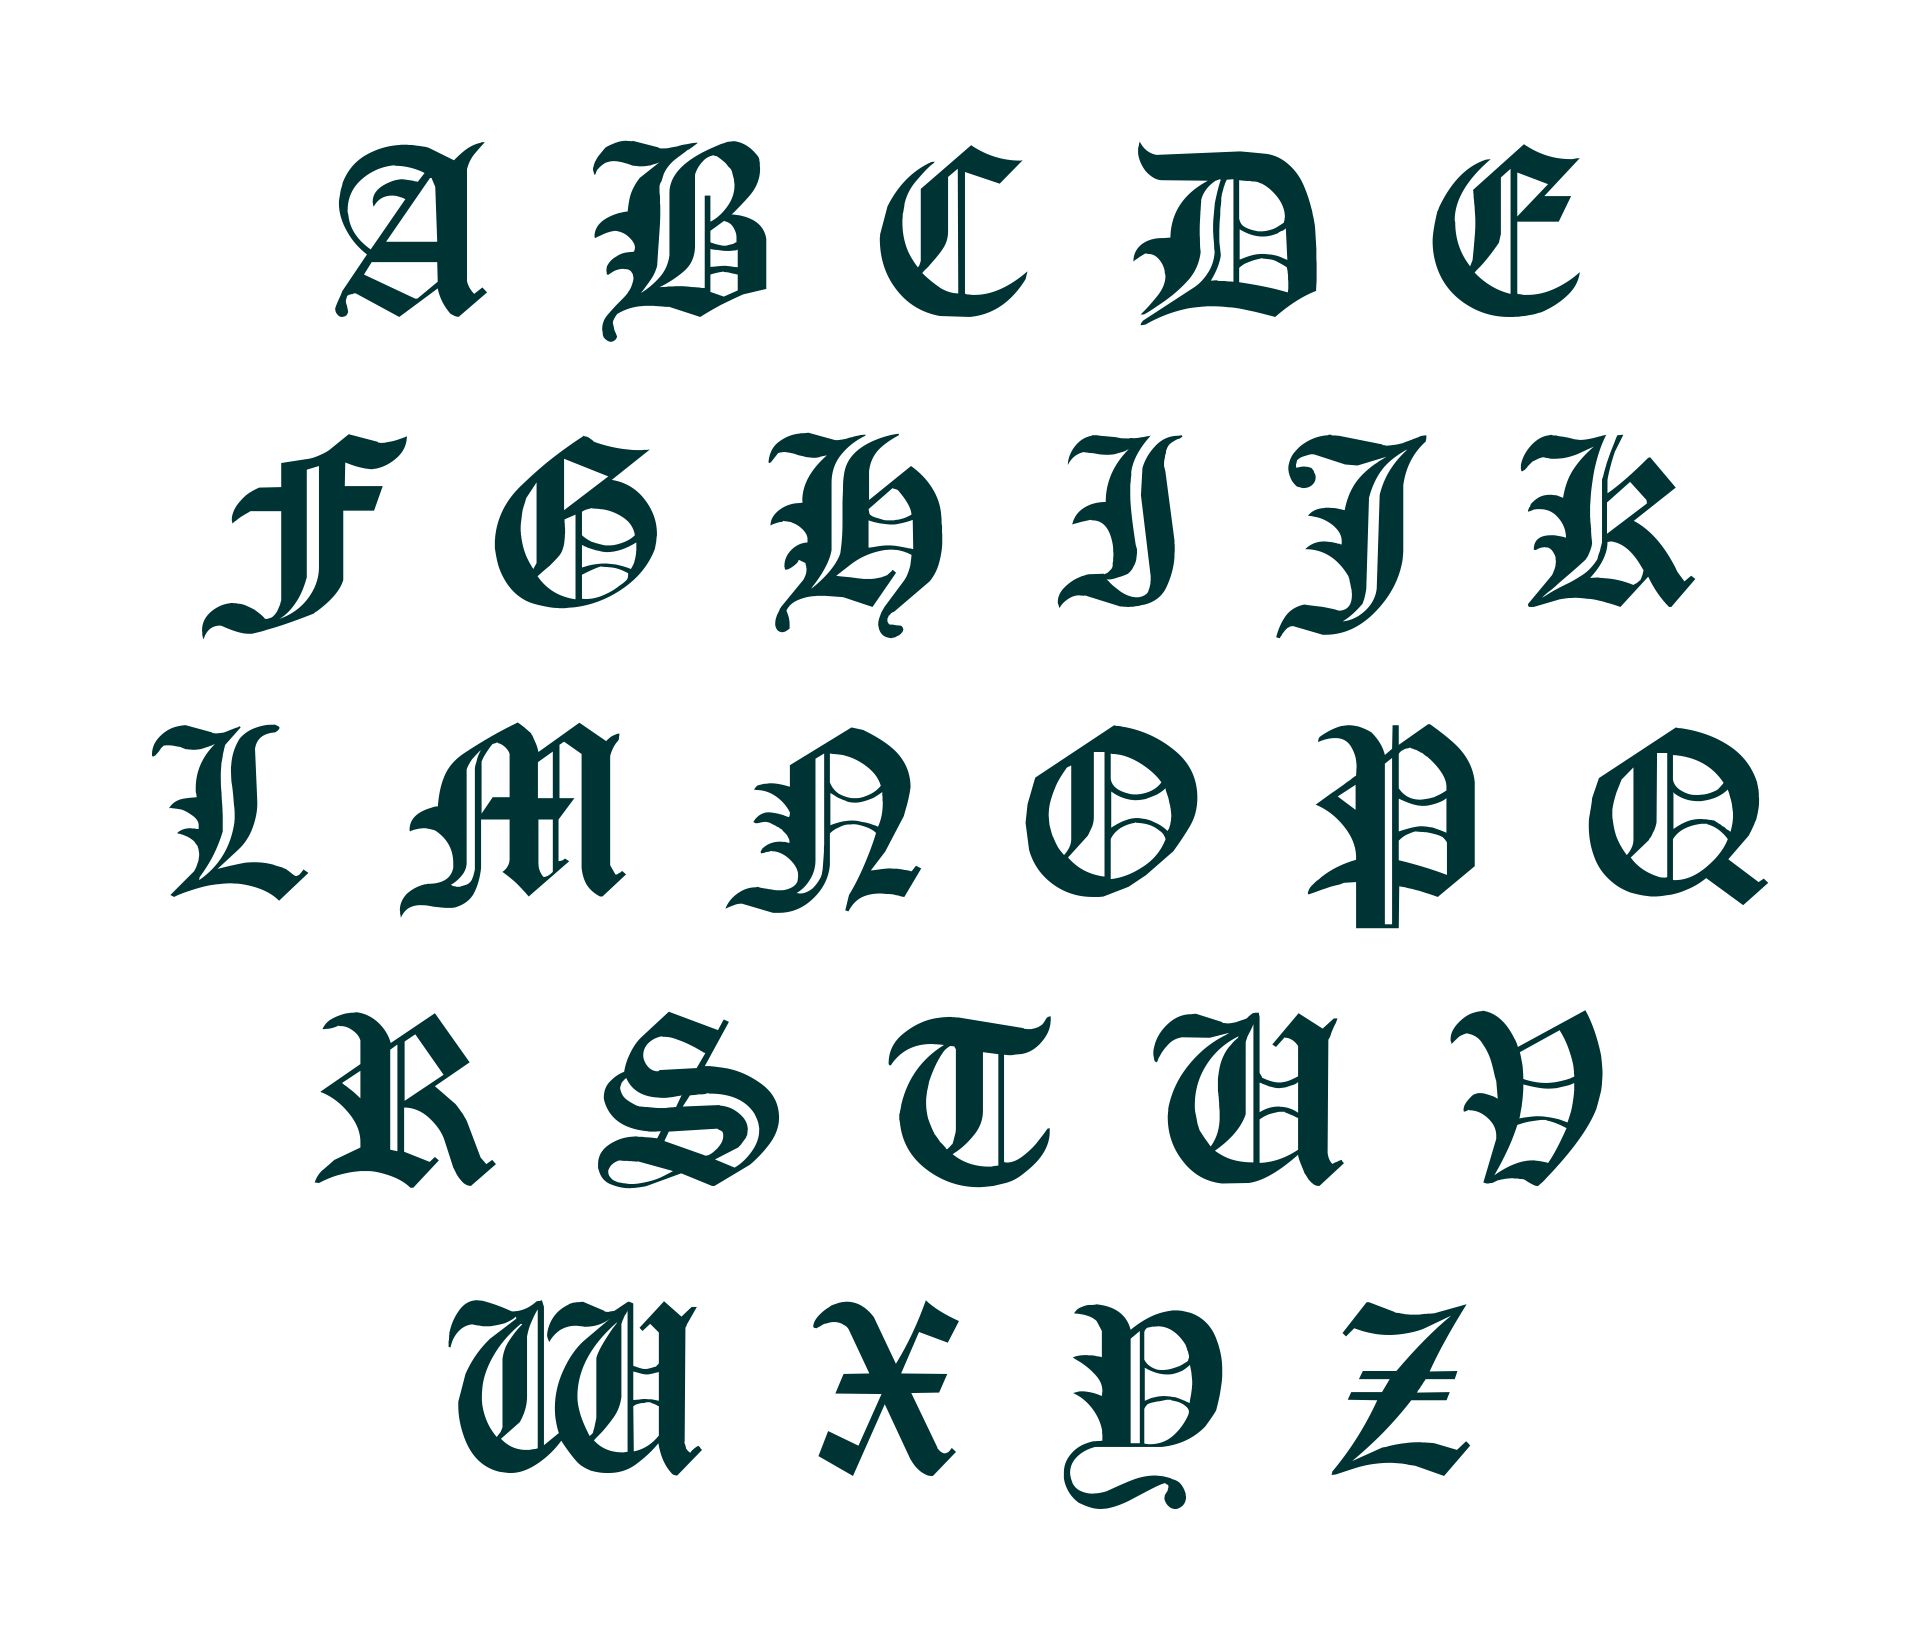 5 Best Images Of Printable Old English Alphabet A Z Gothic Old 